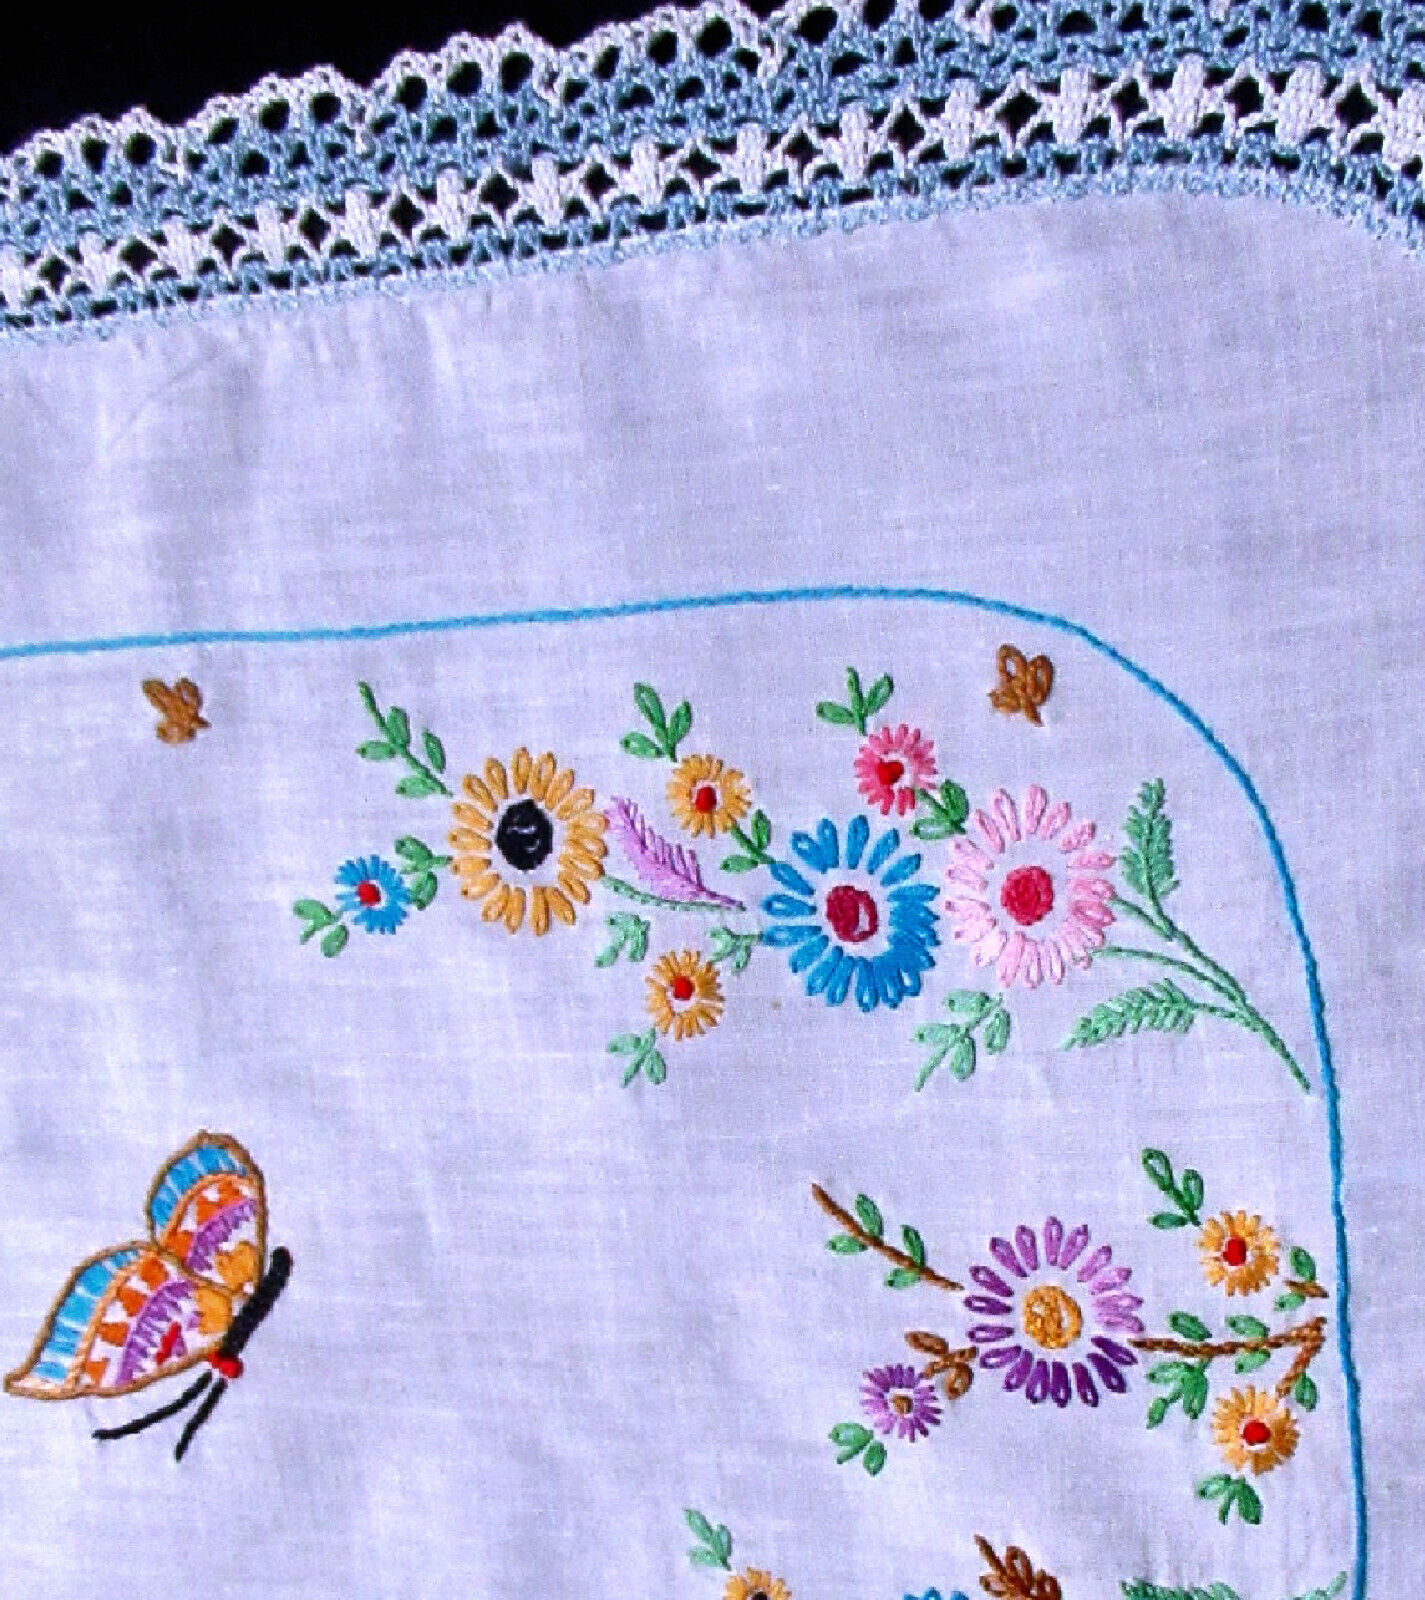 Vintage 40" Linen Table Runner Handmade Blue Lace Embroidered Flowers Butterfly